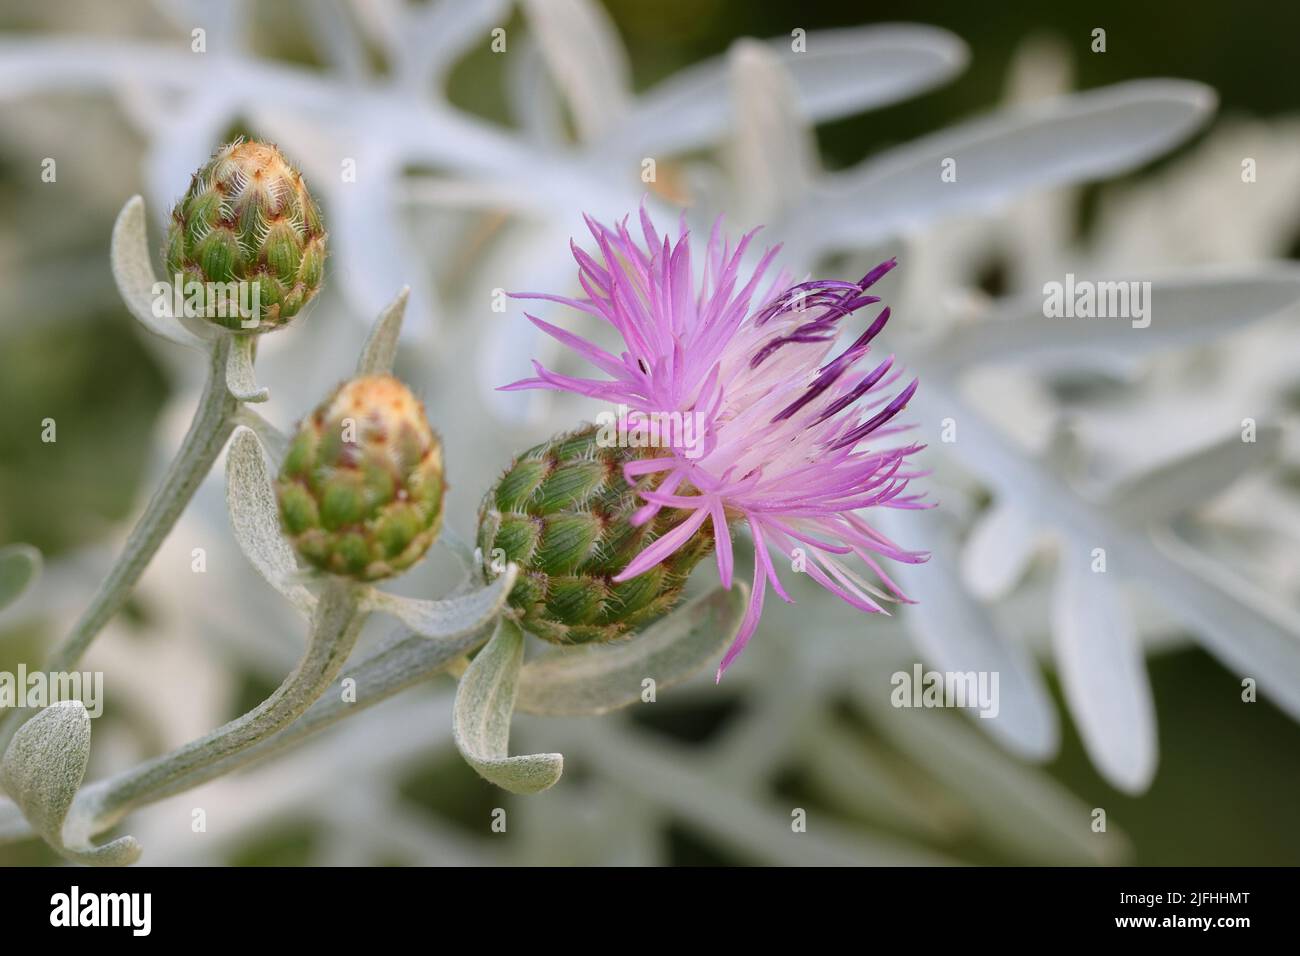 close-up of a light purple centaurea gymnocarpa and two buds against a white-grey natural background Stock Photo